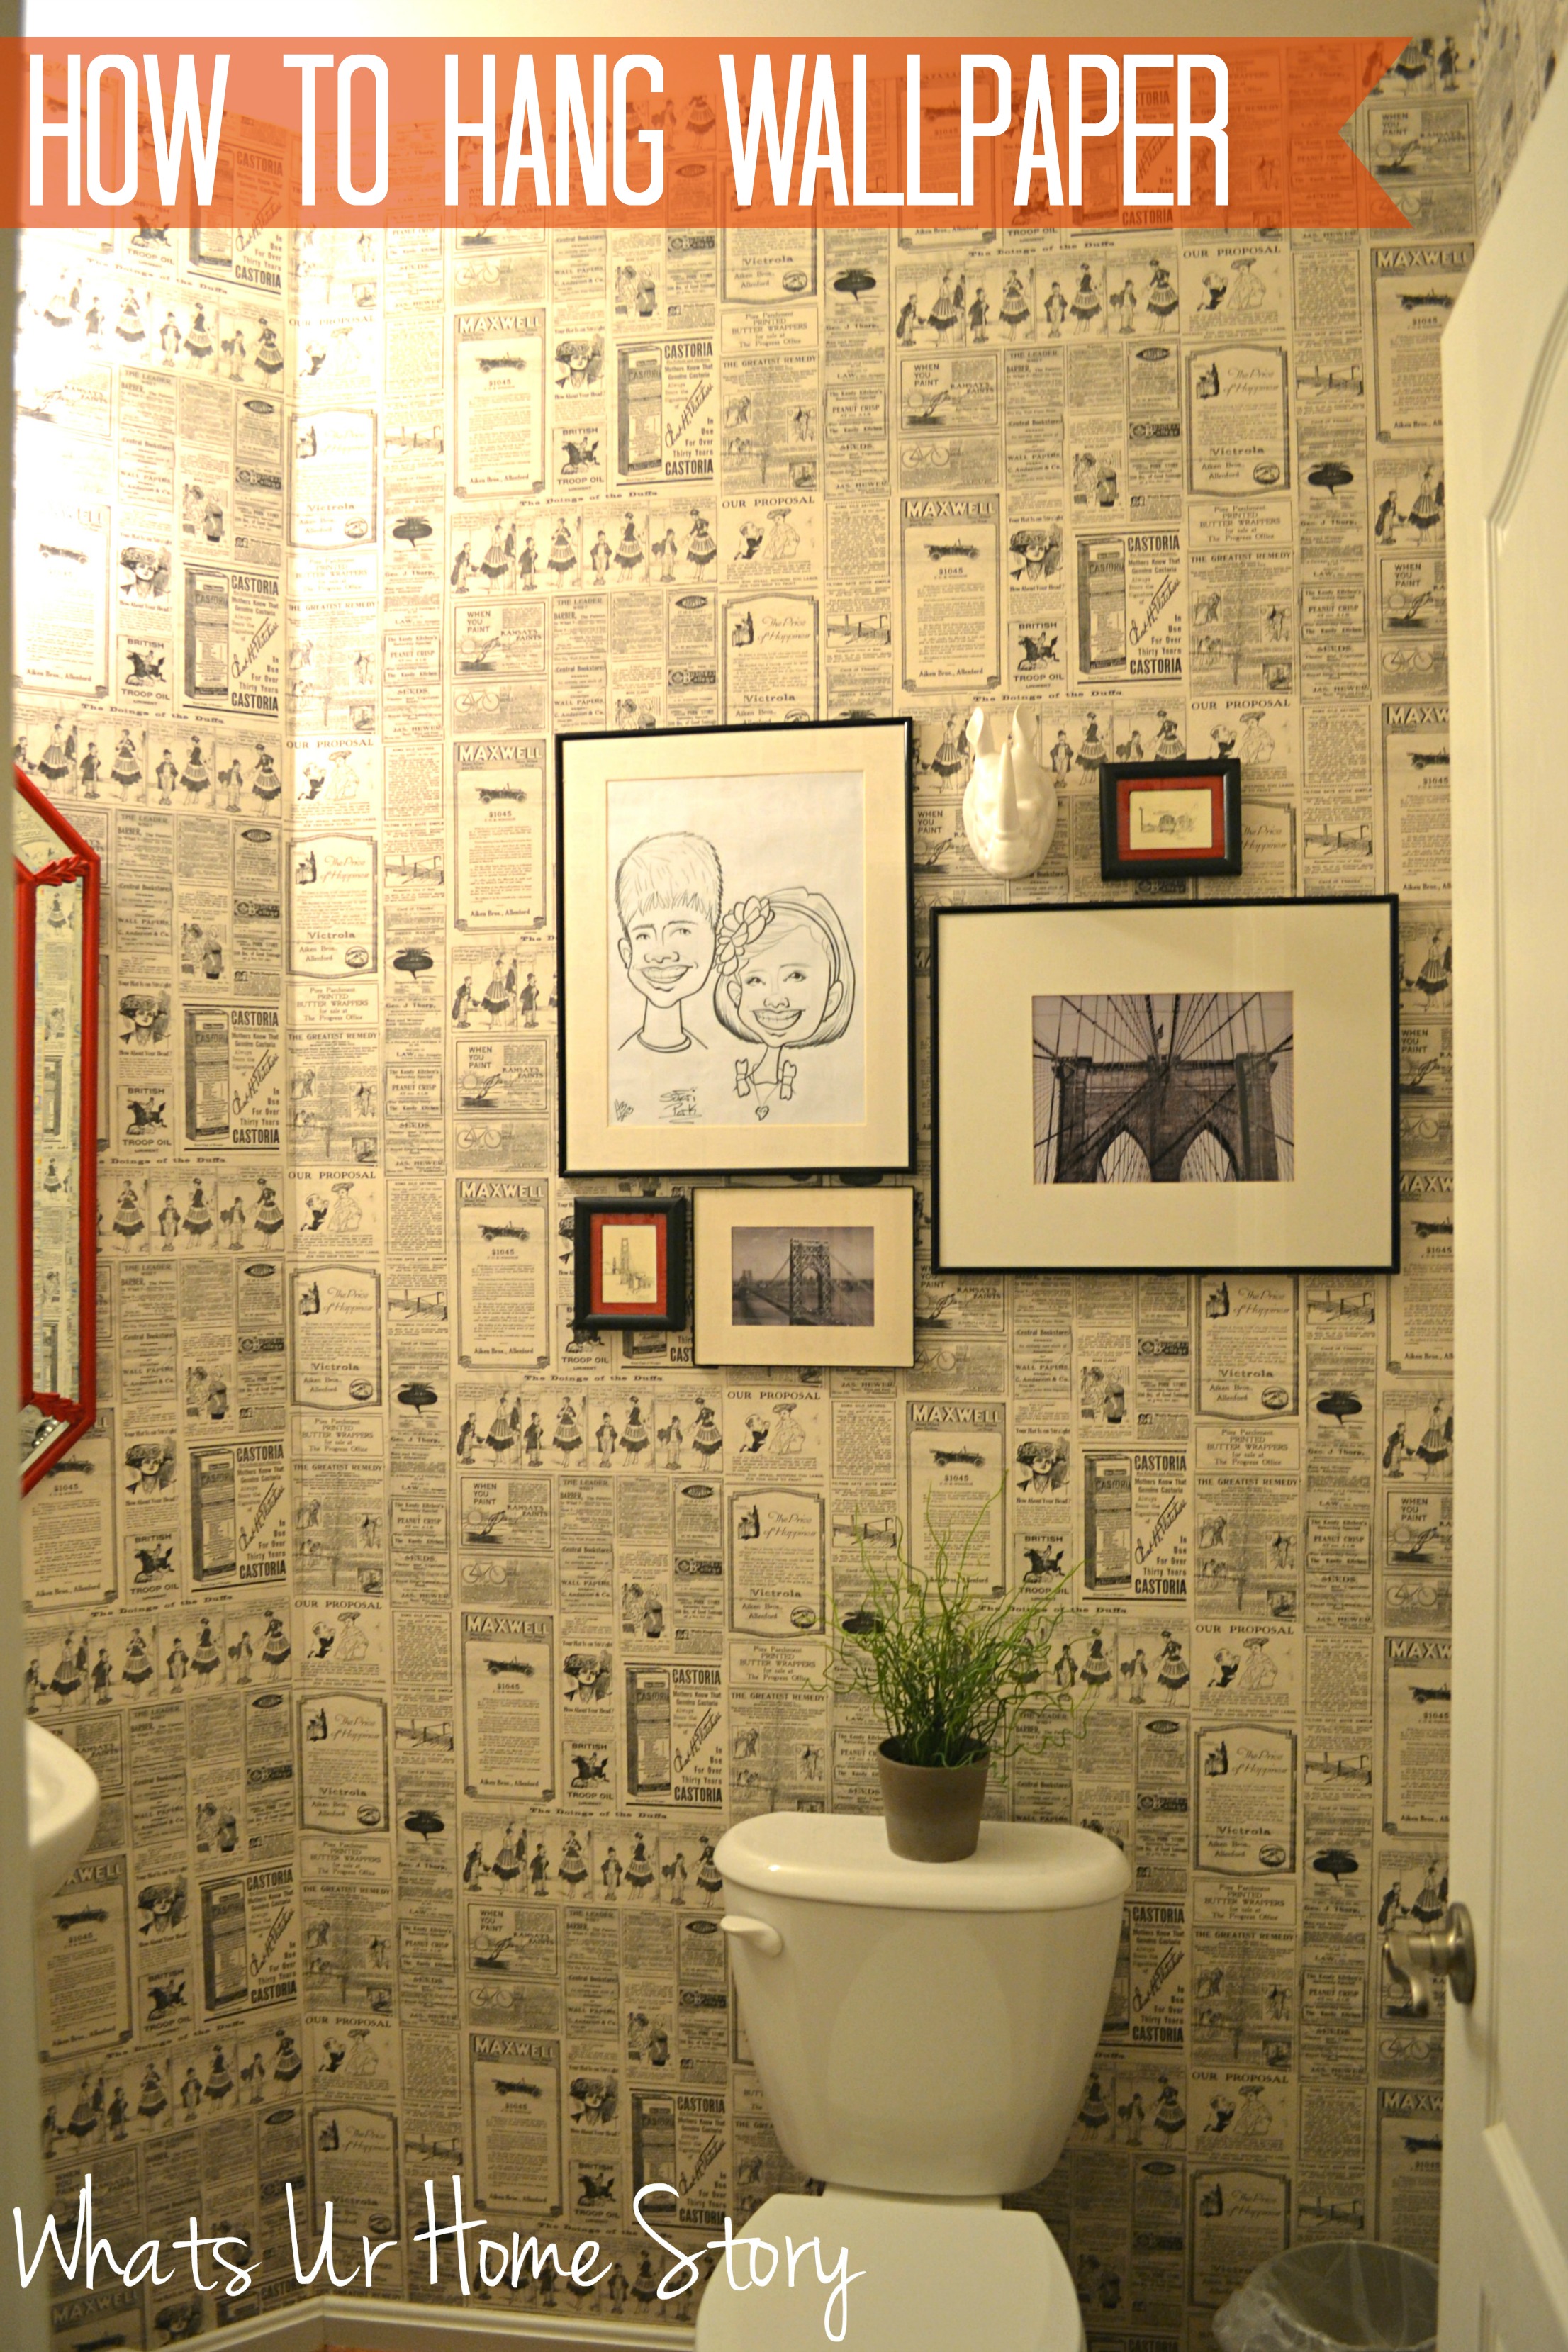 Whats Ur Home Story: How to hang wallpaper, vintage newspaper wallpaper, wallpaper powder room